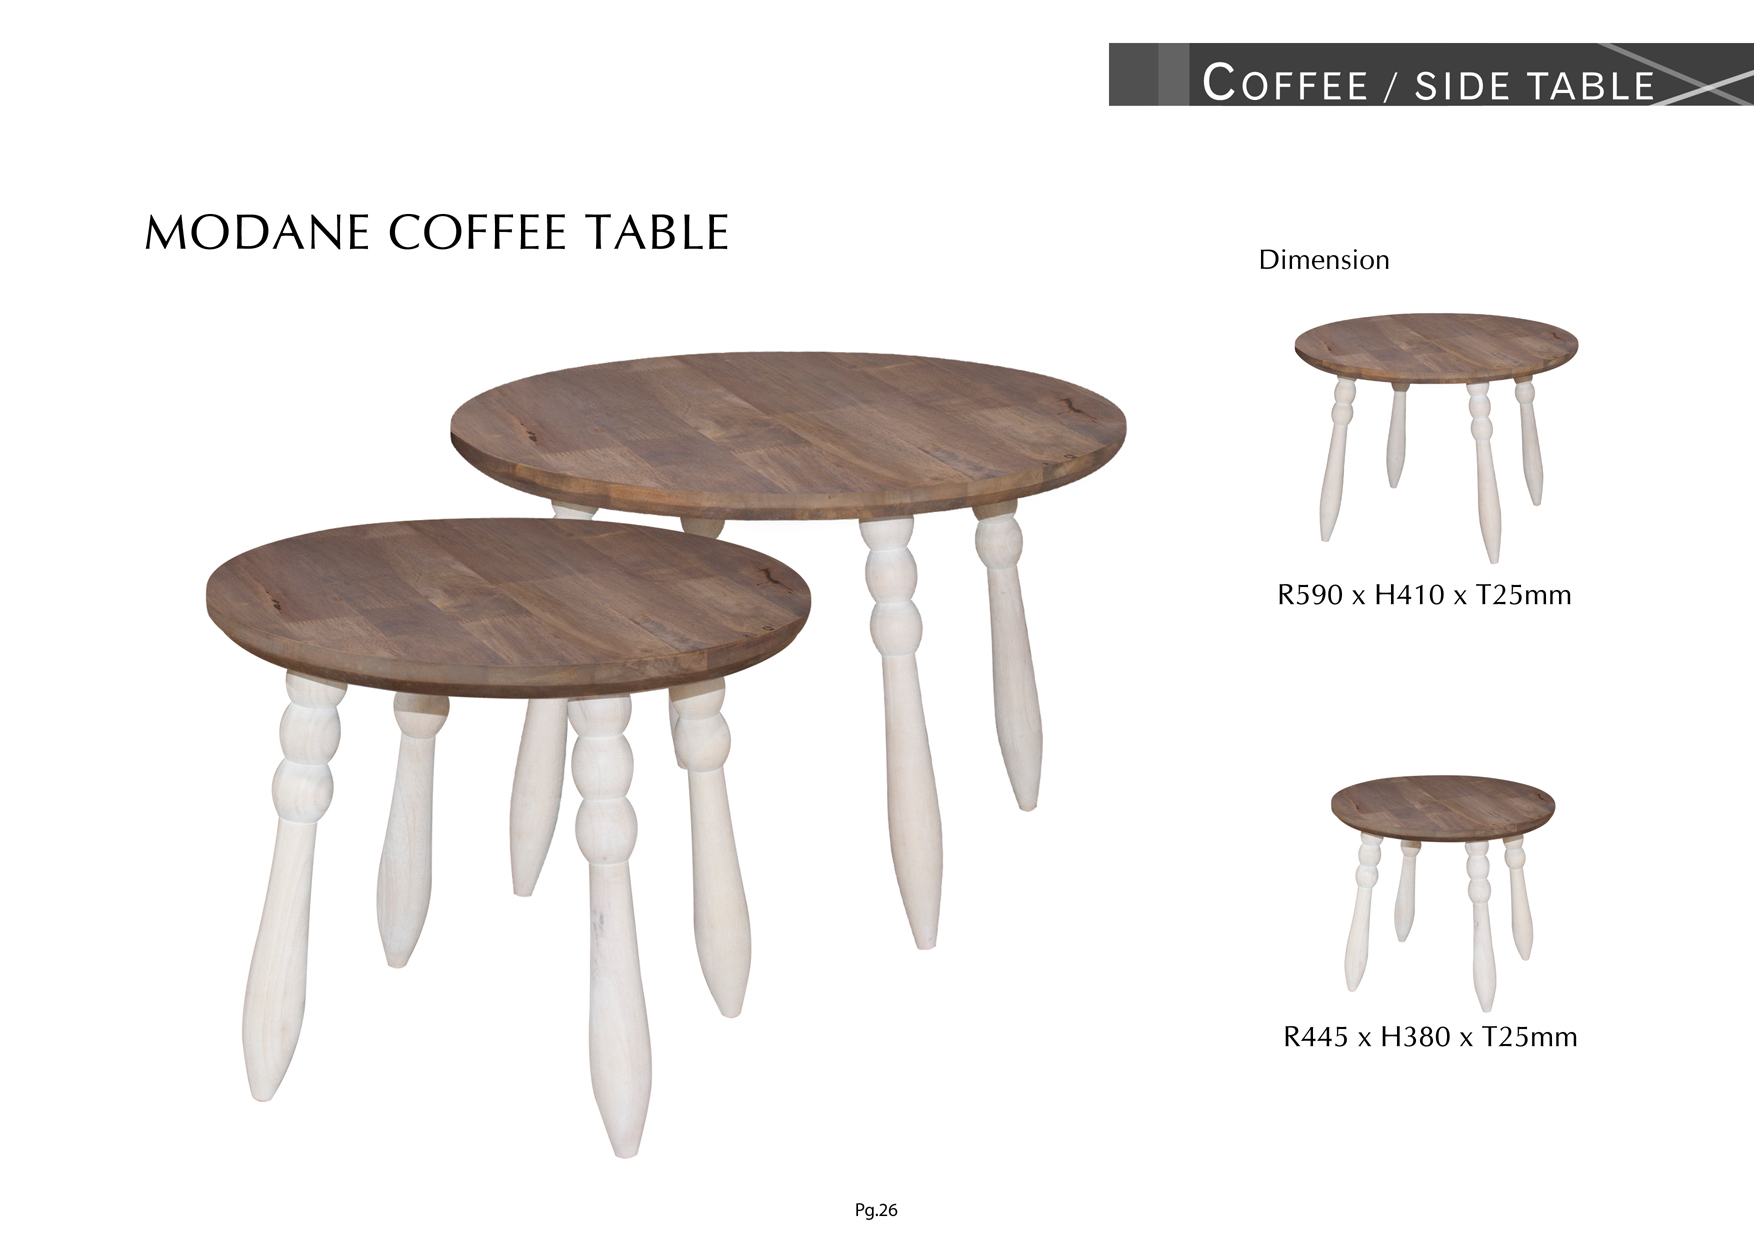 Product: PG26. MODANE COFFEE TABLE